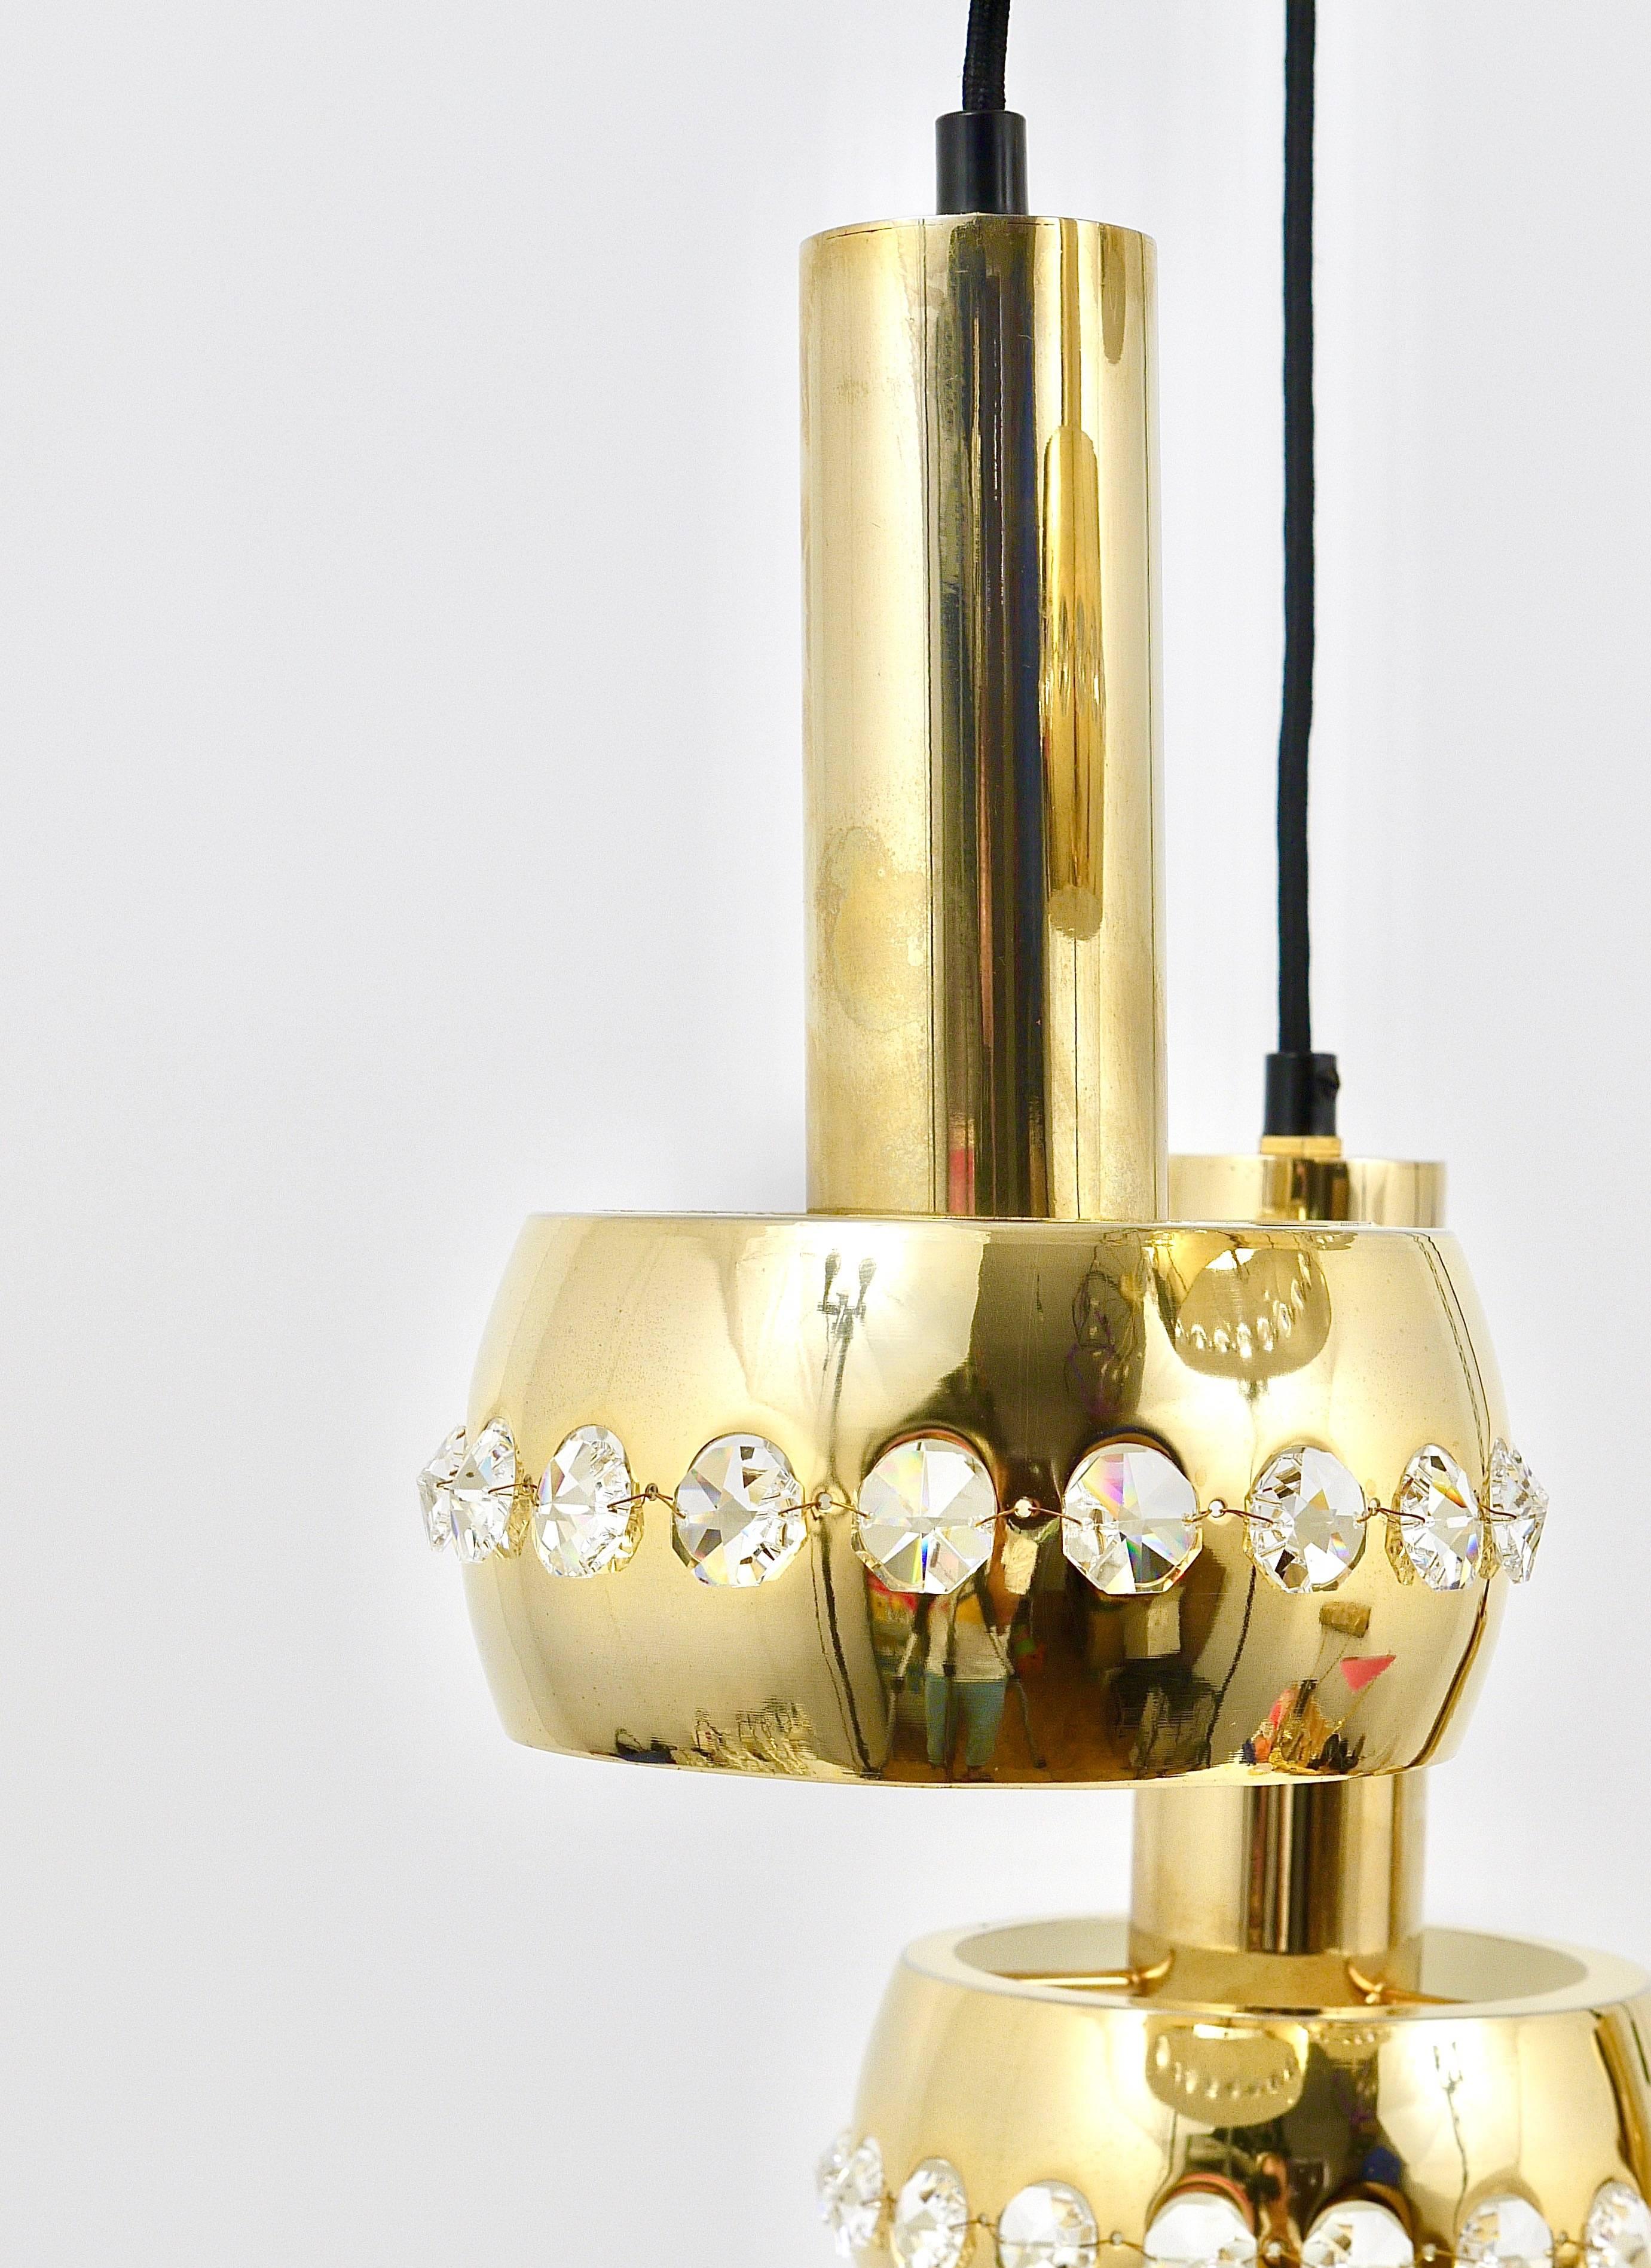 Five-Tier Bakalowits Brass & Crystals Cascade Chandelier Pendant Light, Austria In Excellent Condition For Sale In Vienna, AT